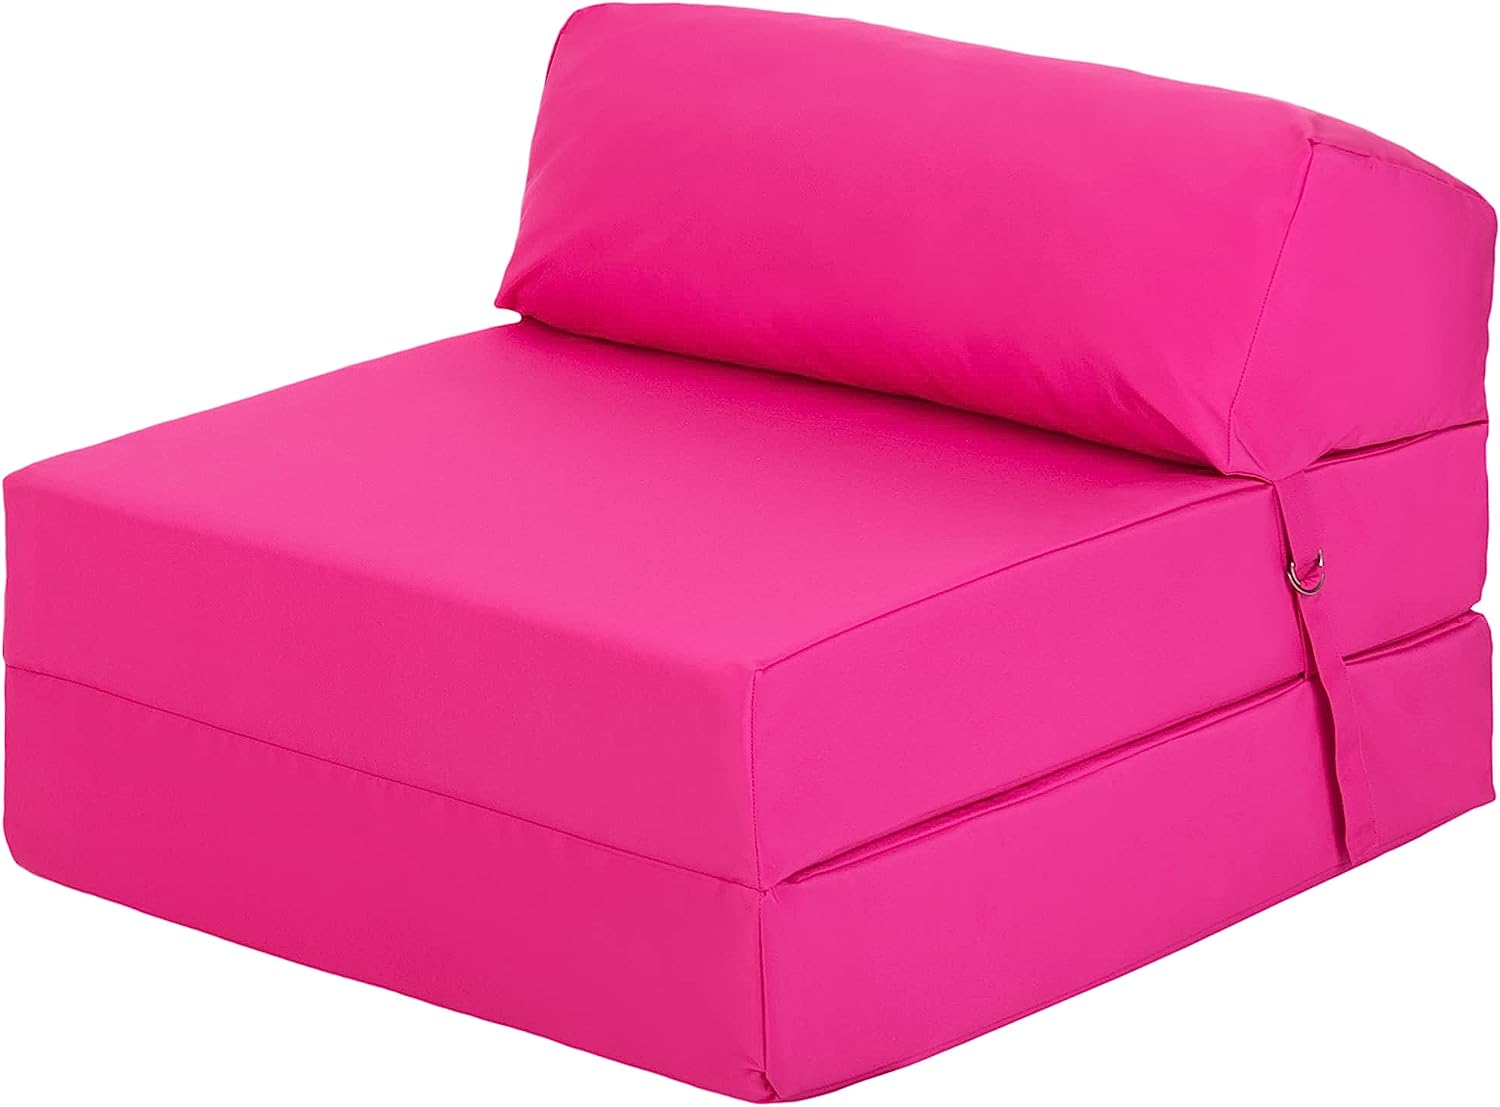 Fold Out Z Bed Chair pink cover